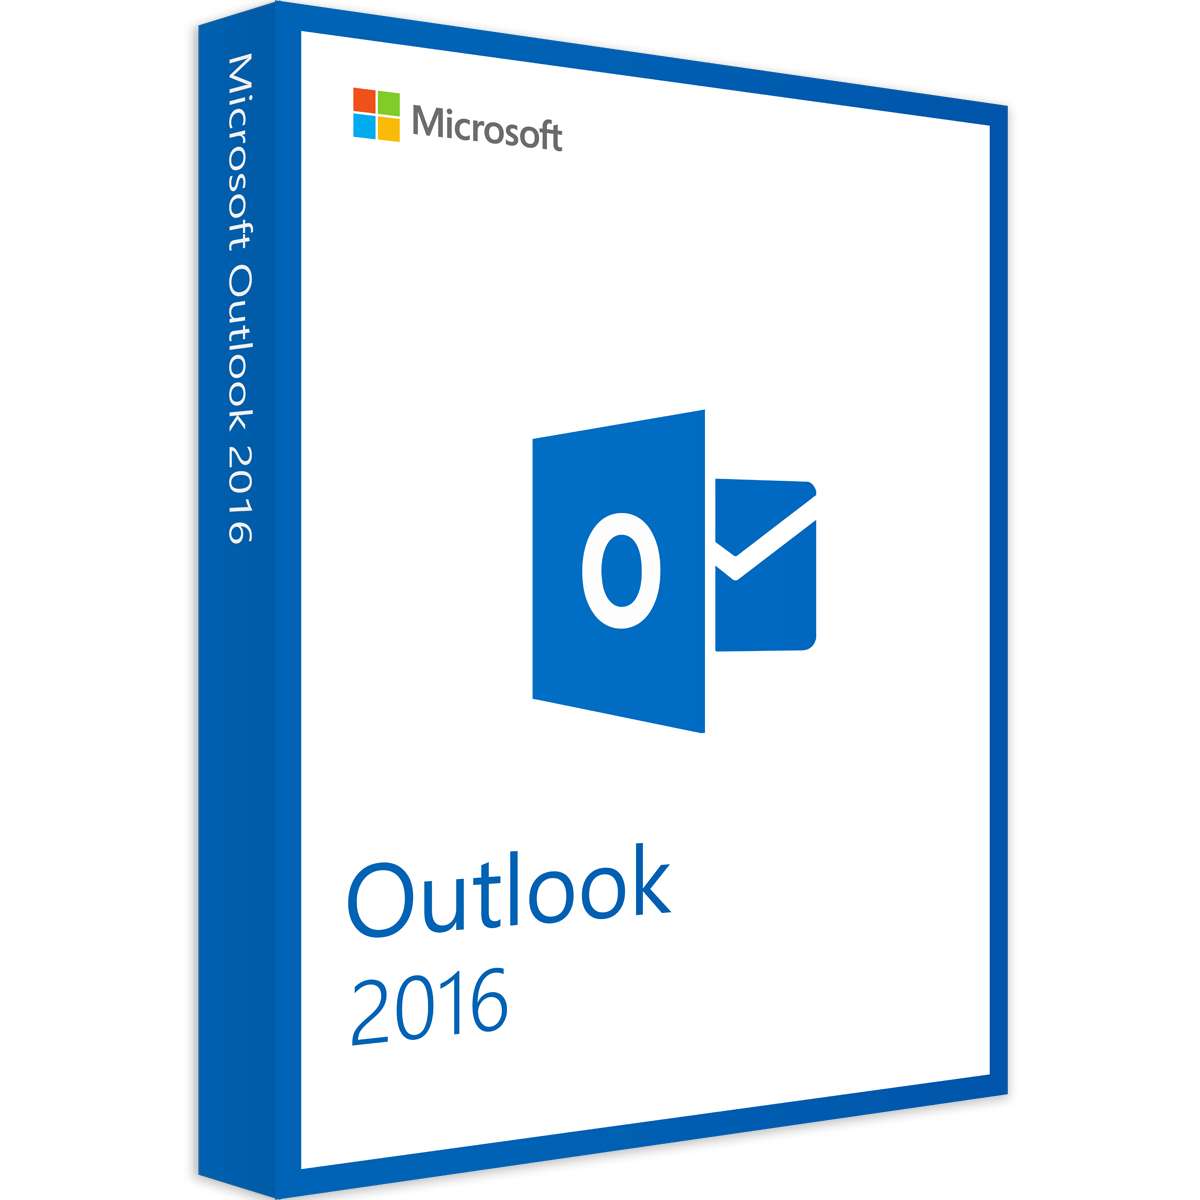 microsoft office 2019 professional plus outlook